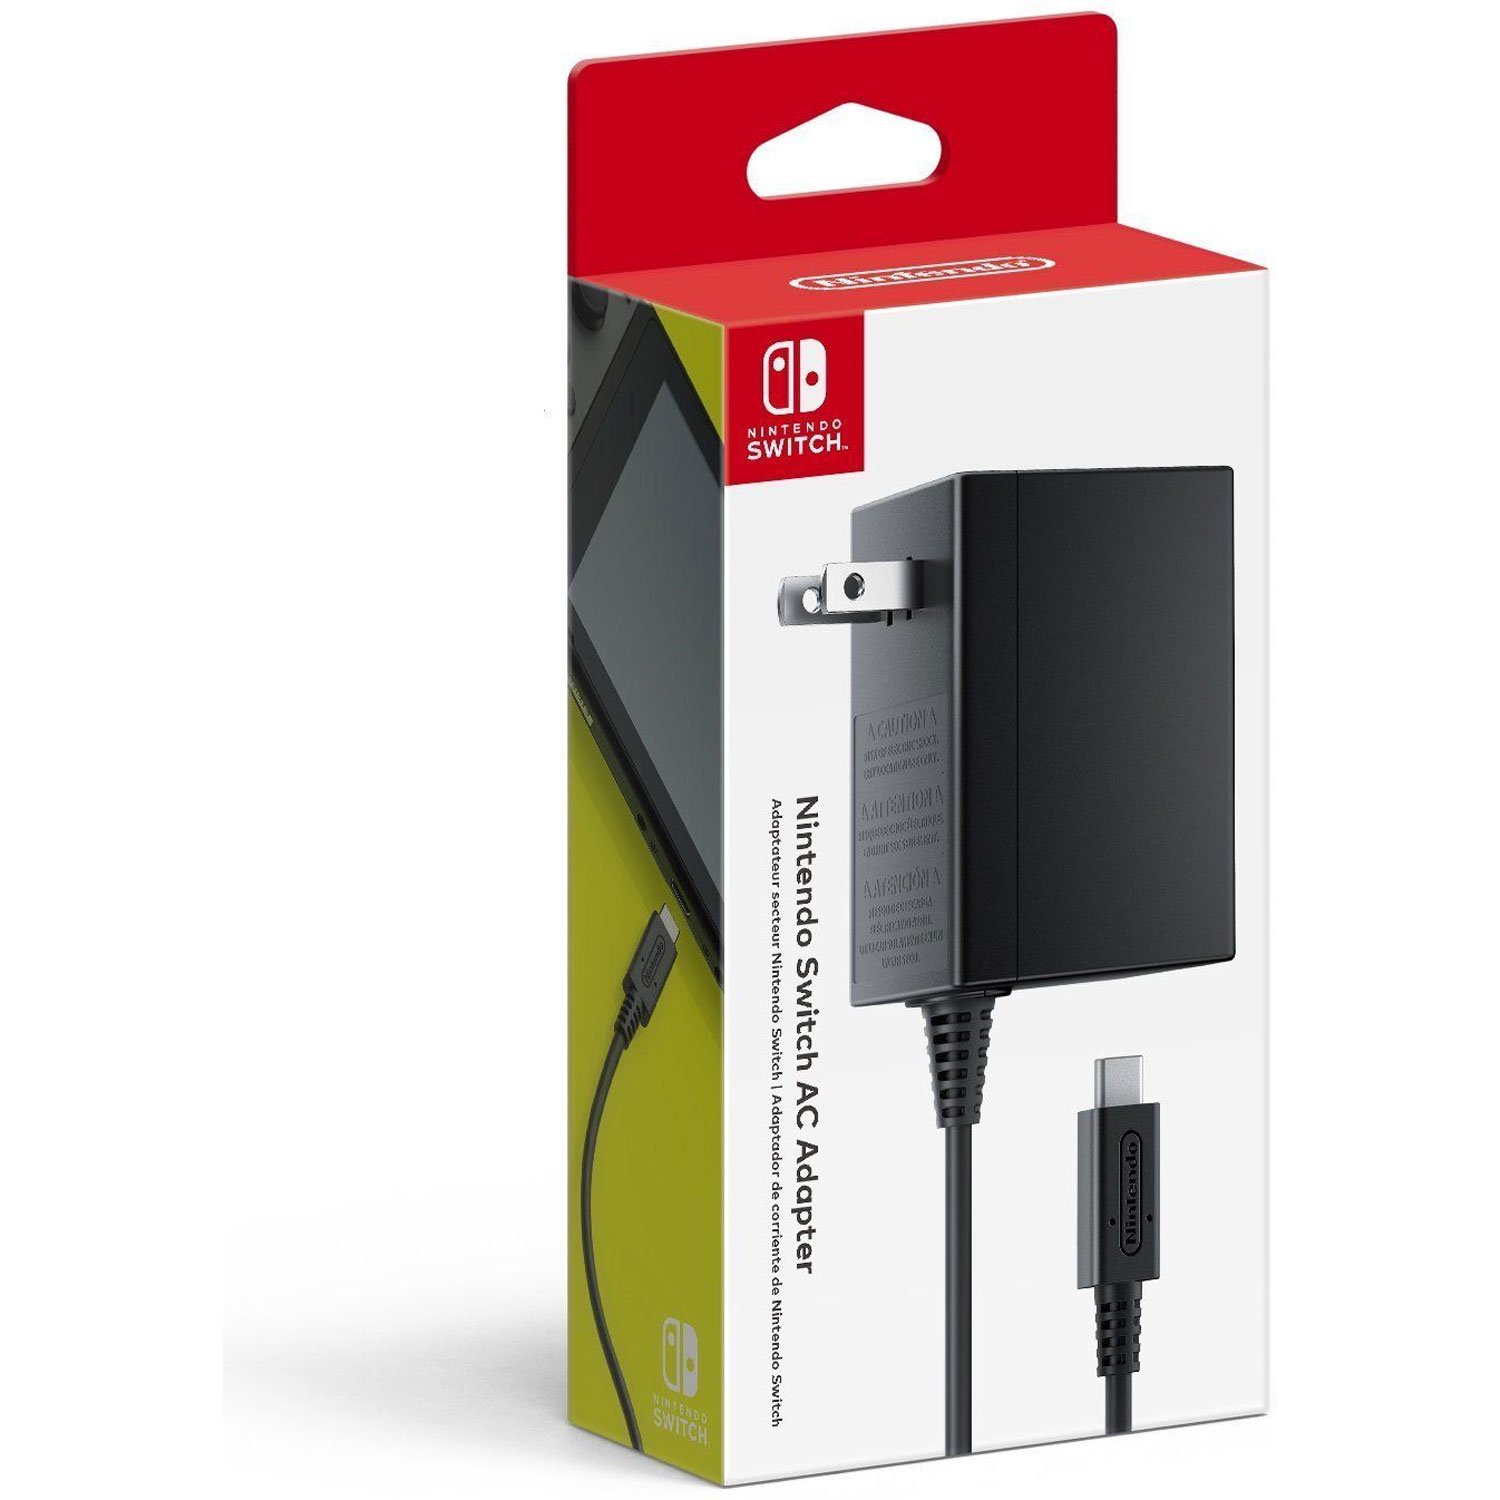 Nintendo Switch AC Adapter About this item Plug in the AC adapter and power your Nintendo Switch system from any 120 vo - Click Image to Close